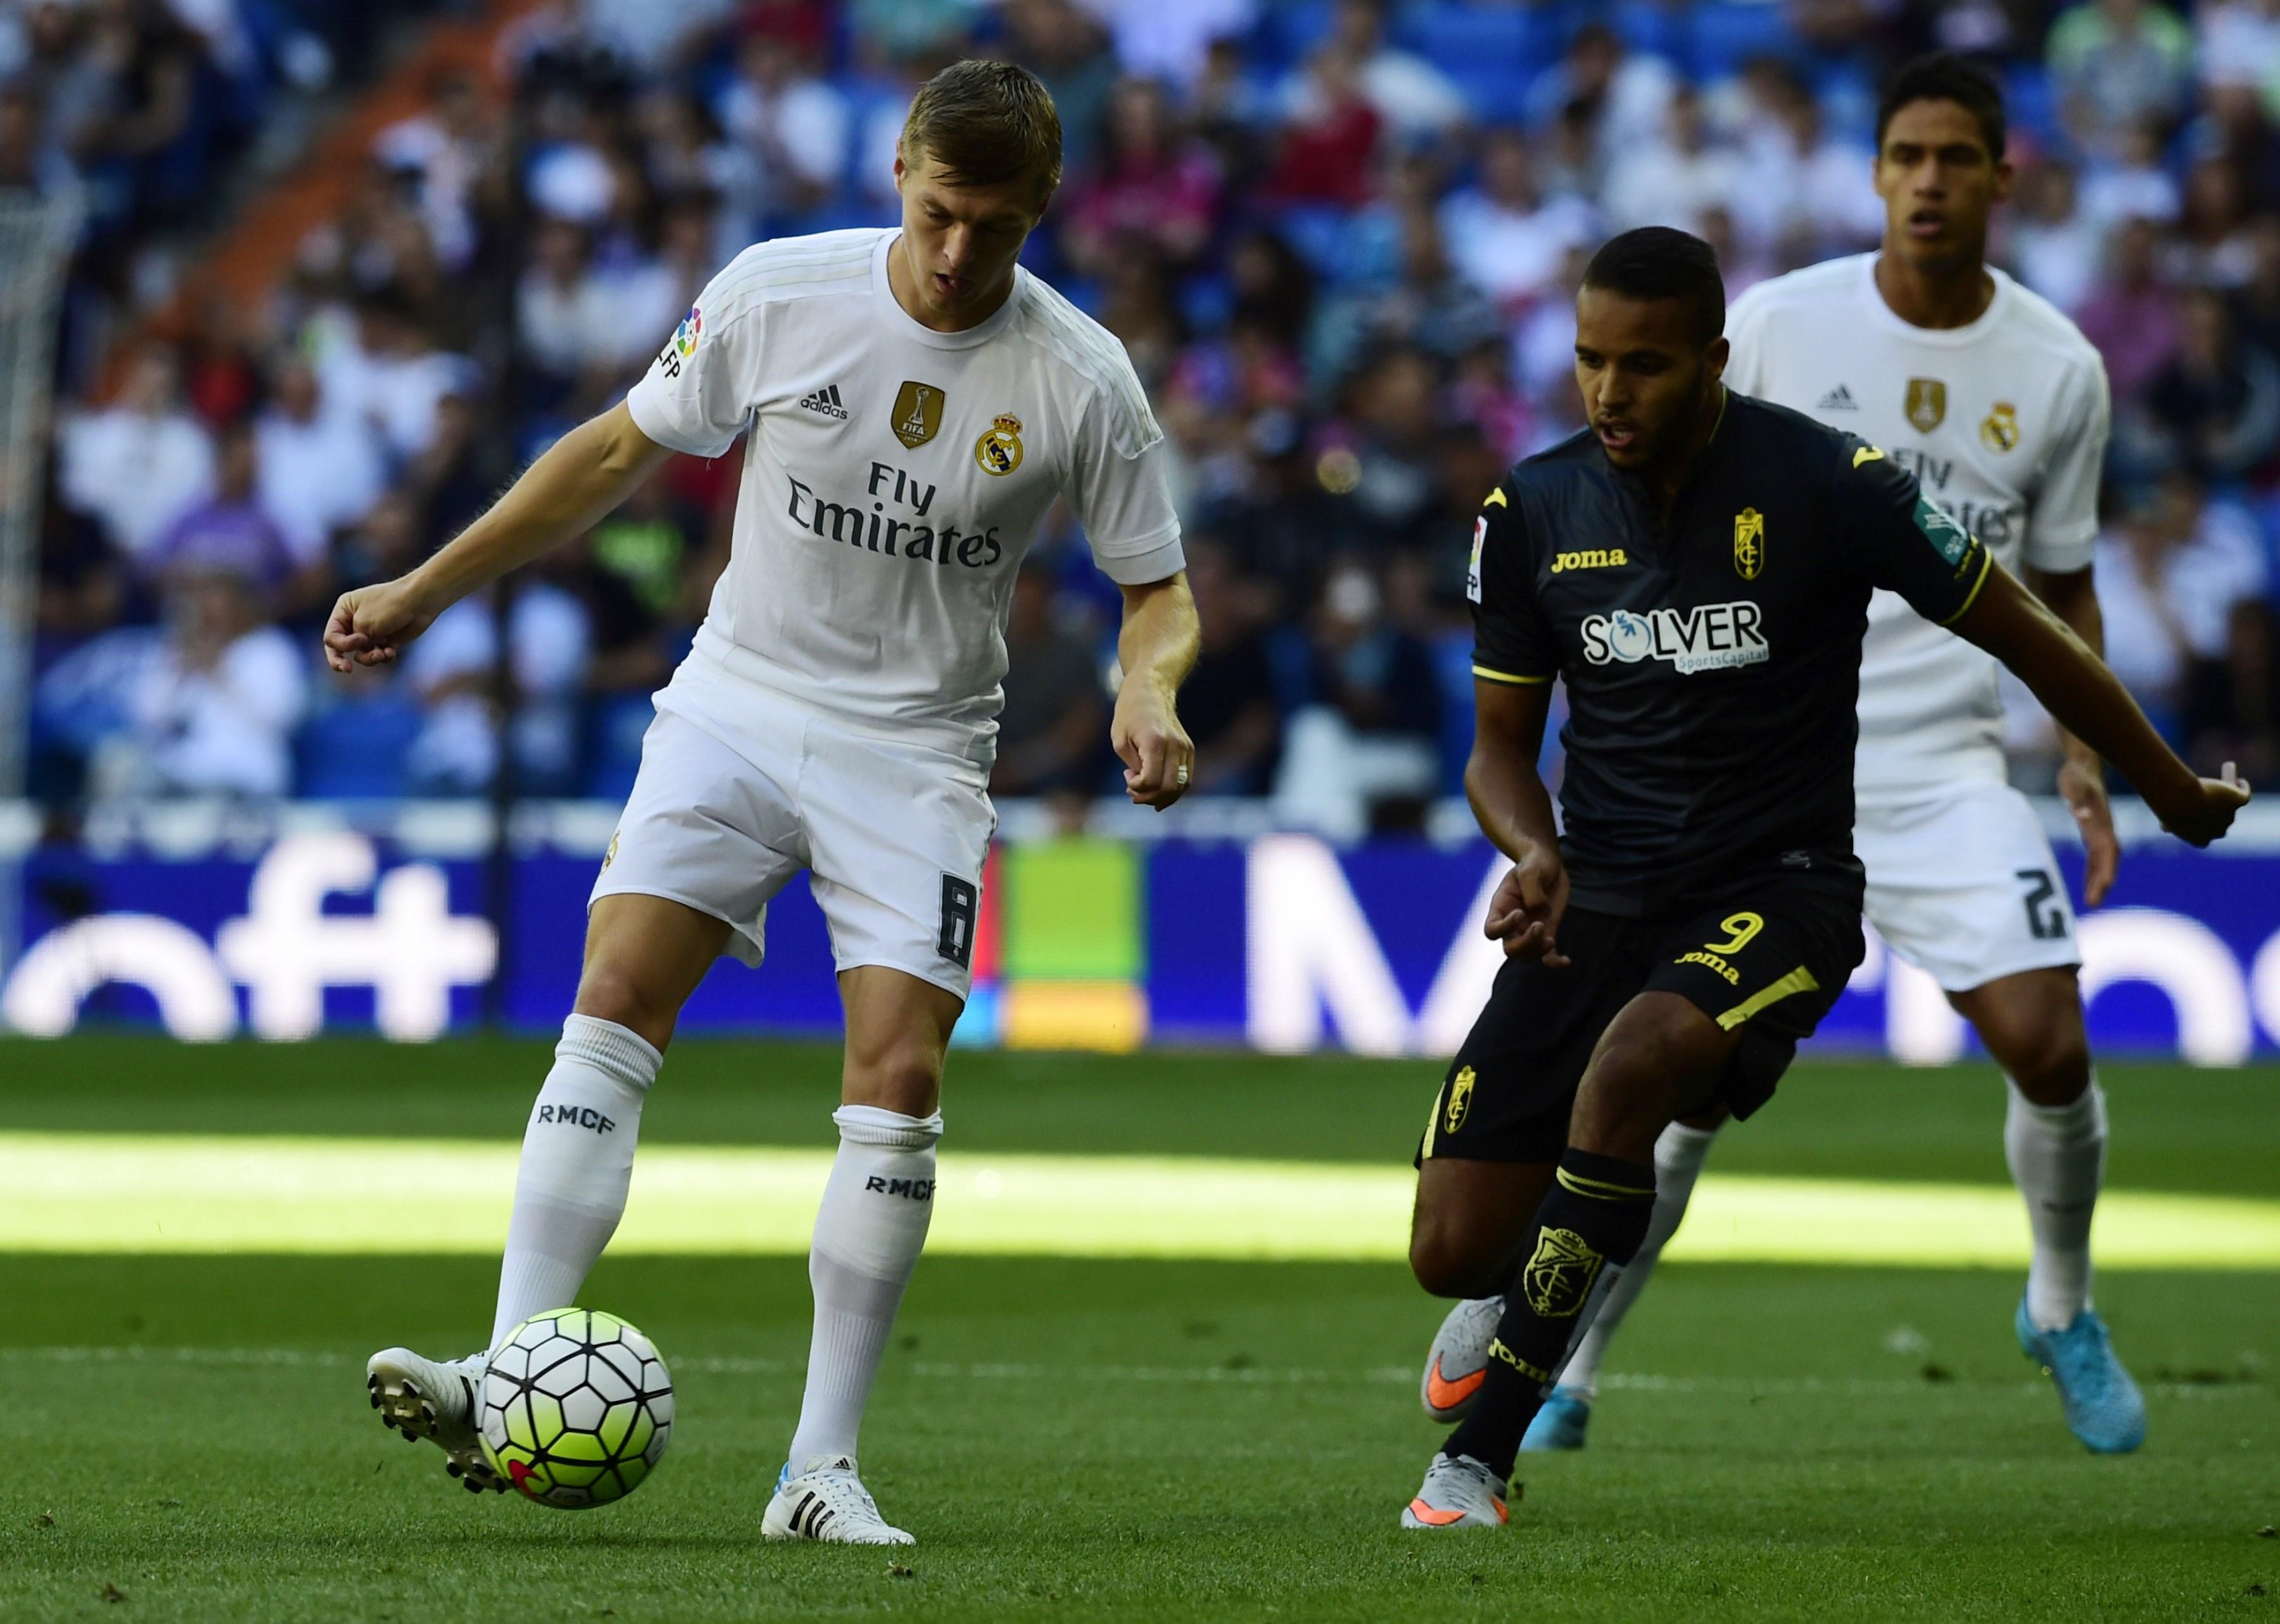 Real Madrid's German midfielder Toni Kroos (L) vies with Granada's Moroccan forward Youssef El-Arabi during the Spanish league football match Real Madrid CF vs Granada FC at the Santiago Bernabeu stadium in Madrid on Spetember 19, 2015. AFP PHOTO/ JAVIER SORIANO (Photo credit should read JAVIER SORIANO/AFP/Getty Images)